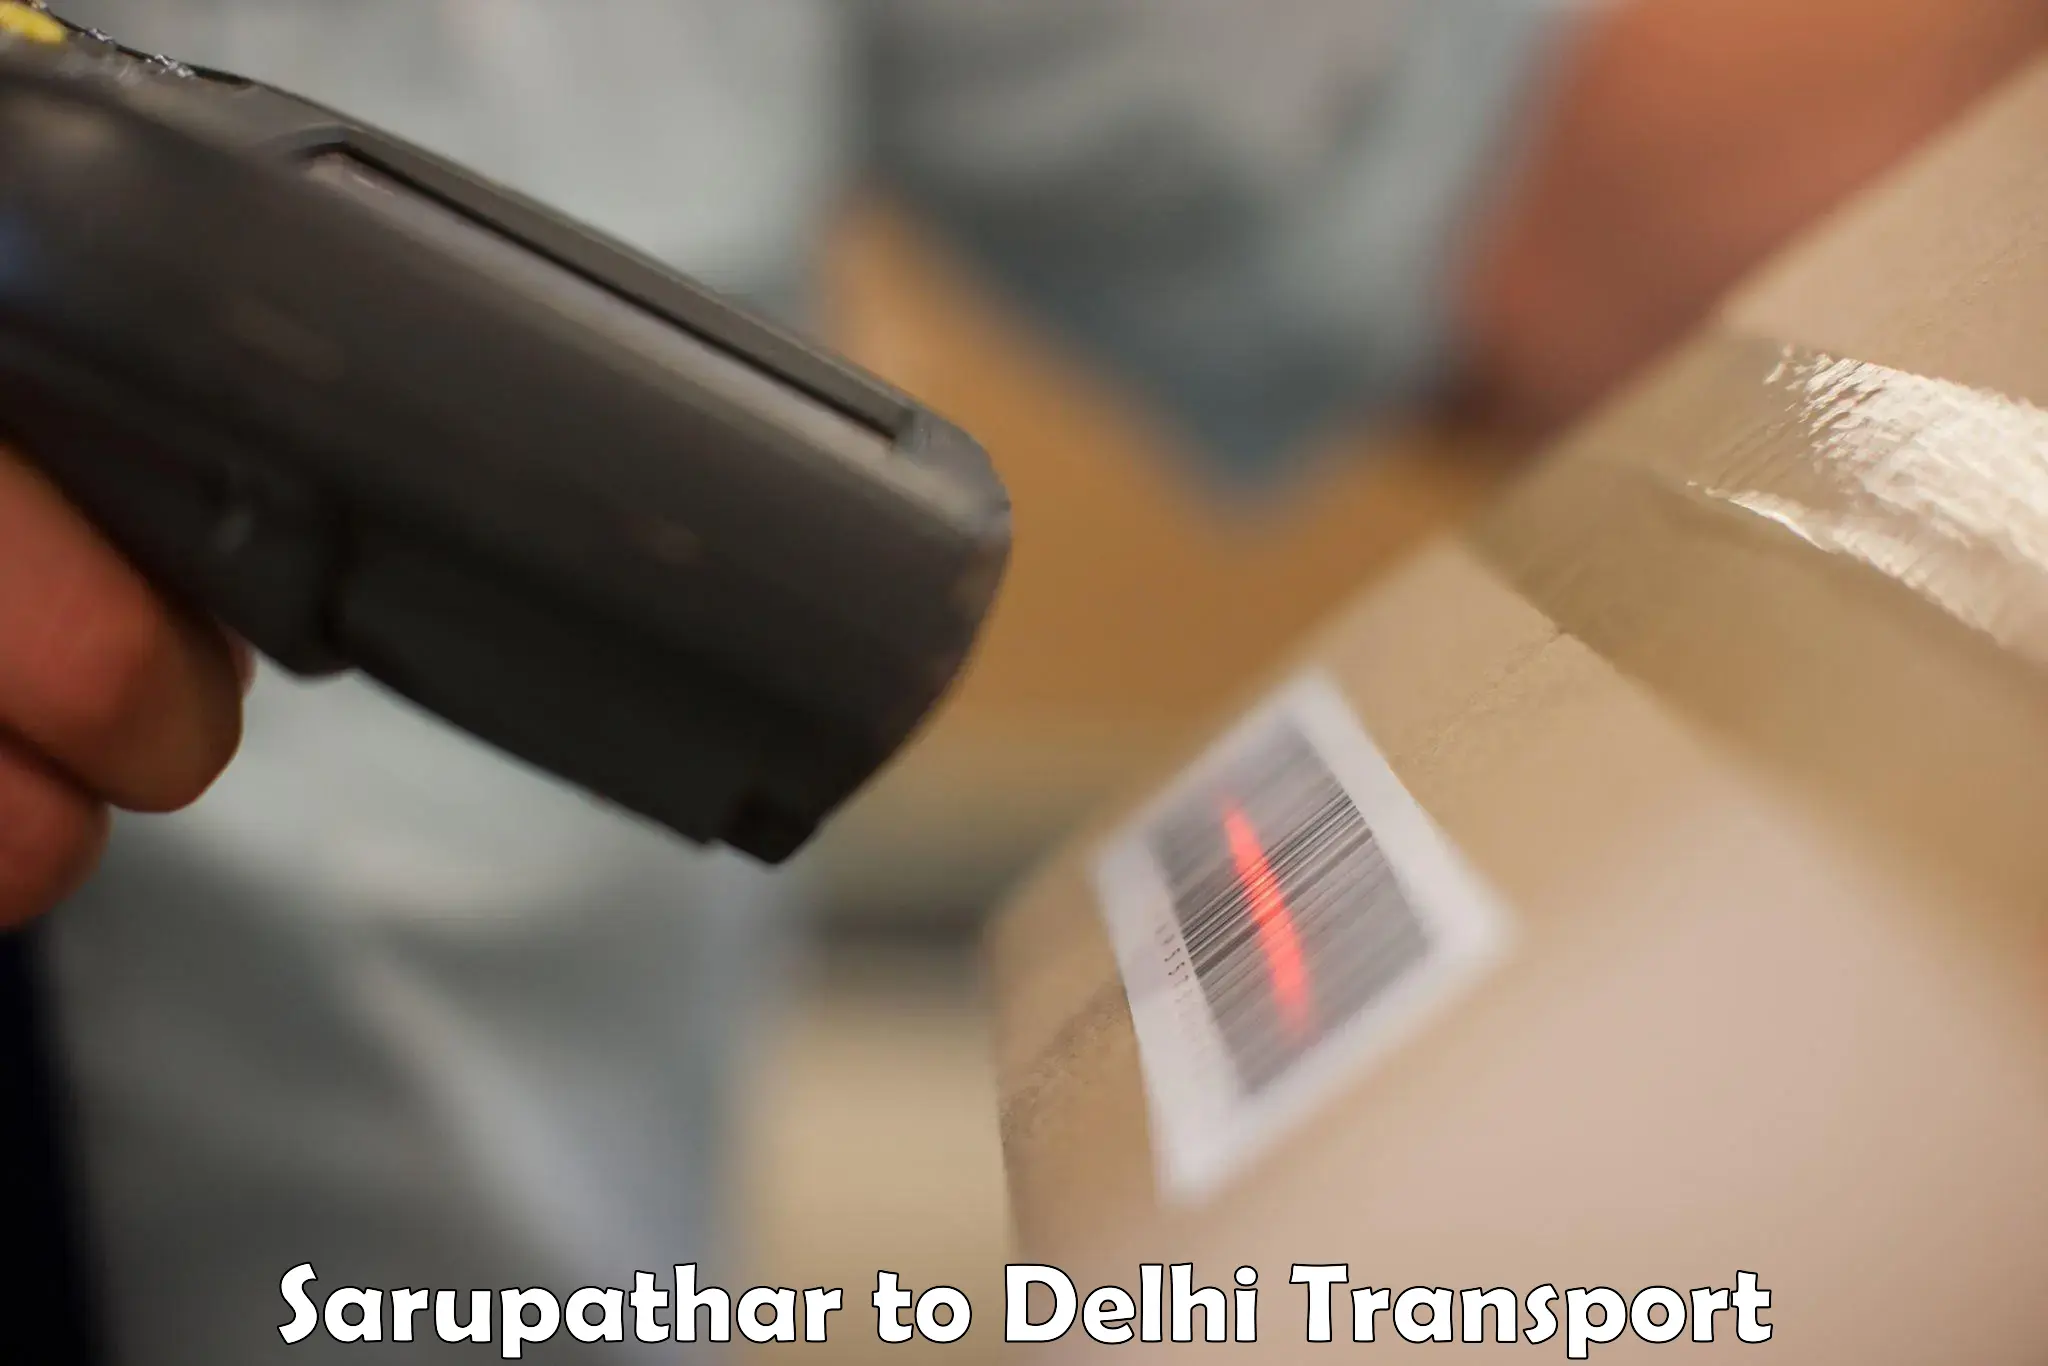 Truck transport companies in India Sarupathar to Lodhi Road